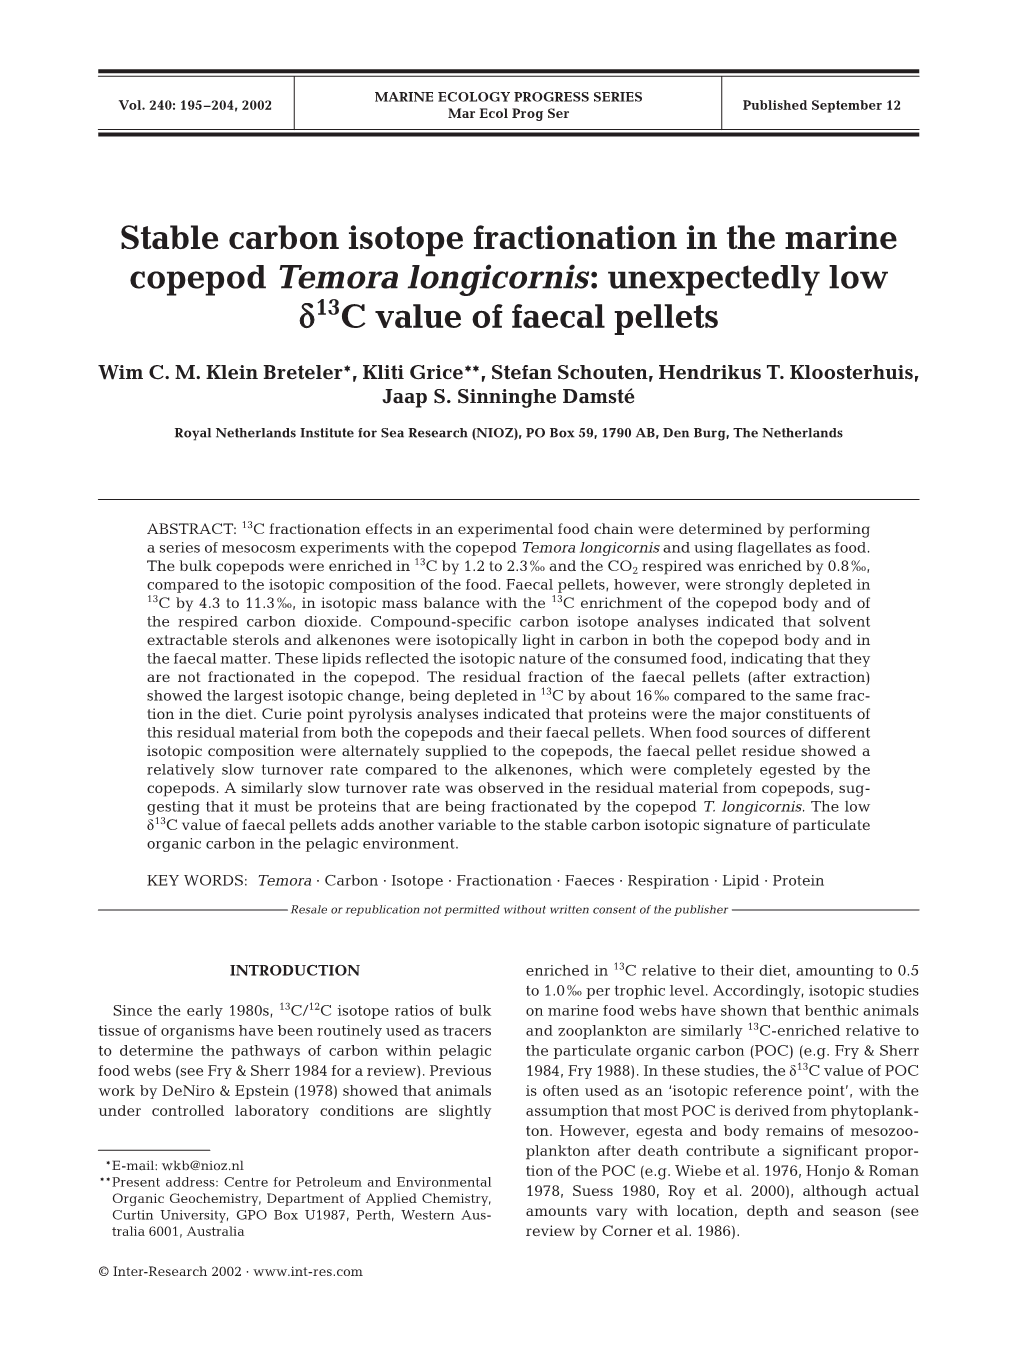 Stable Carbon Isotope Fractionation in the Marine Copepod Temora Longicornis: Unexpectedly Low Δ13c Value of Faecal Pellets